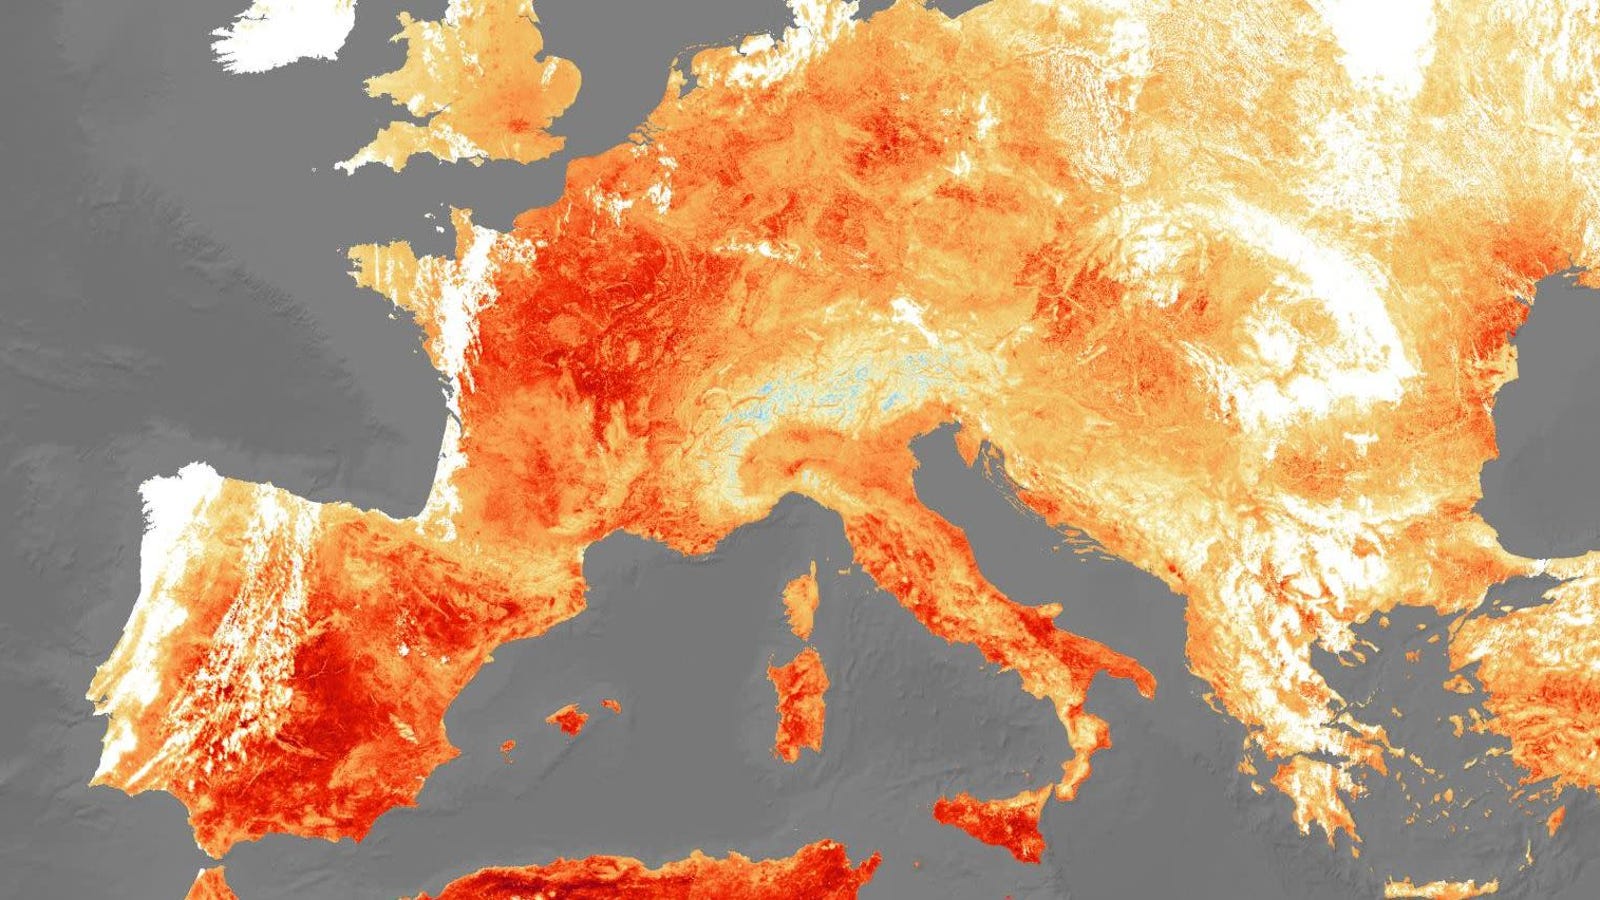 Europe Is Warming Even Faster Than Climate Models Predicted - Gizmodo